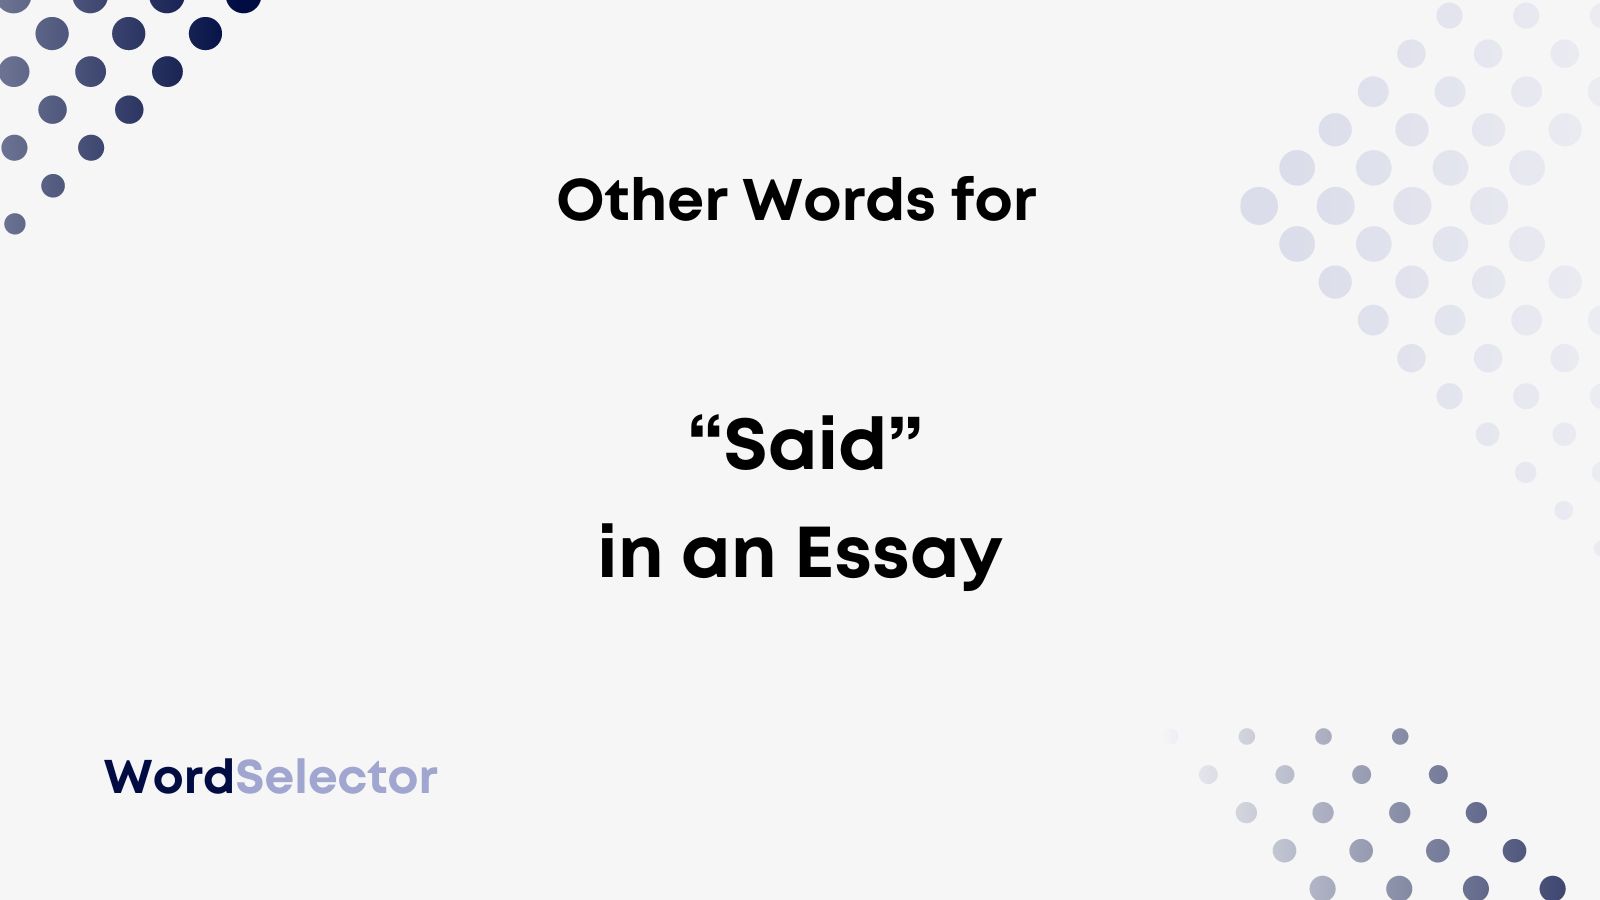 other words to describe essay